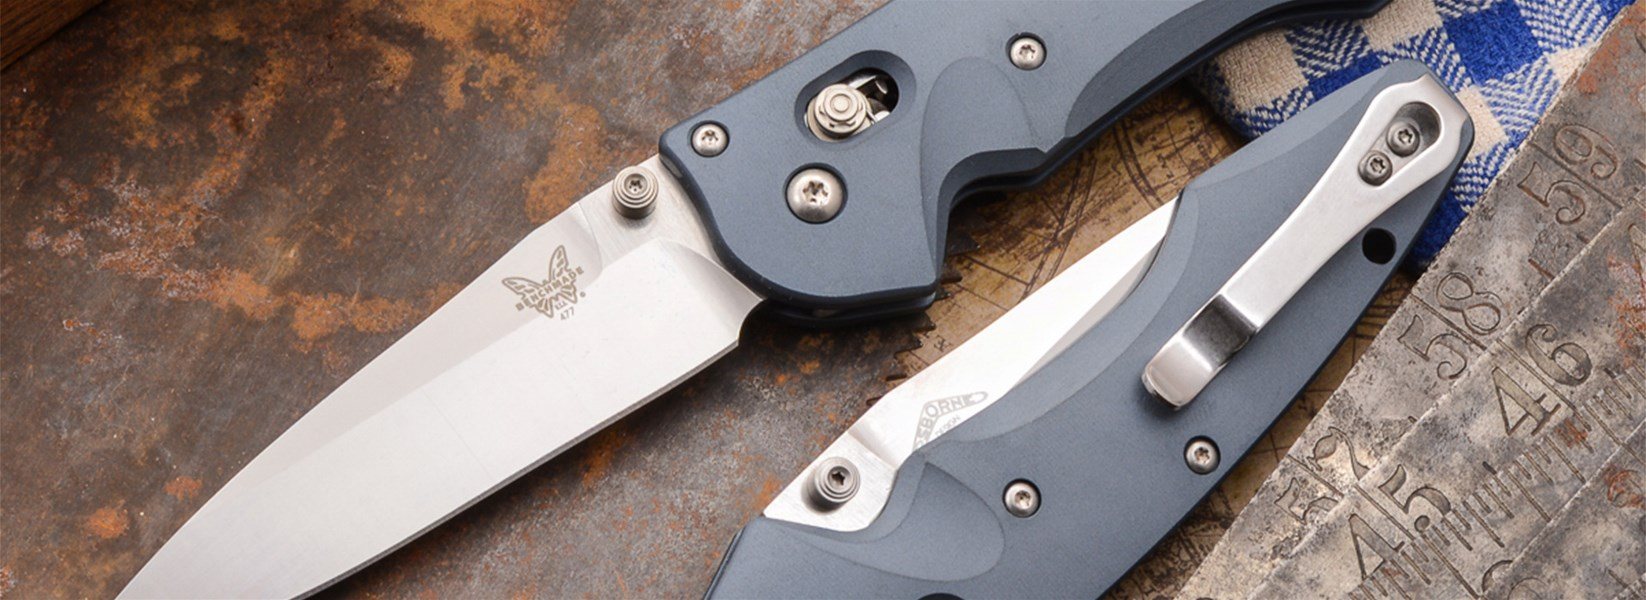 Save $10 on shipping Benchmade Knives